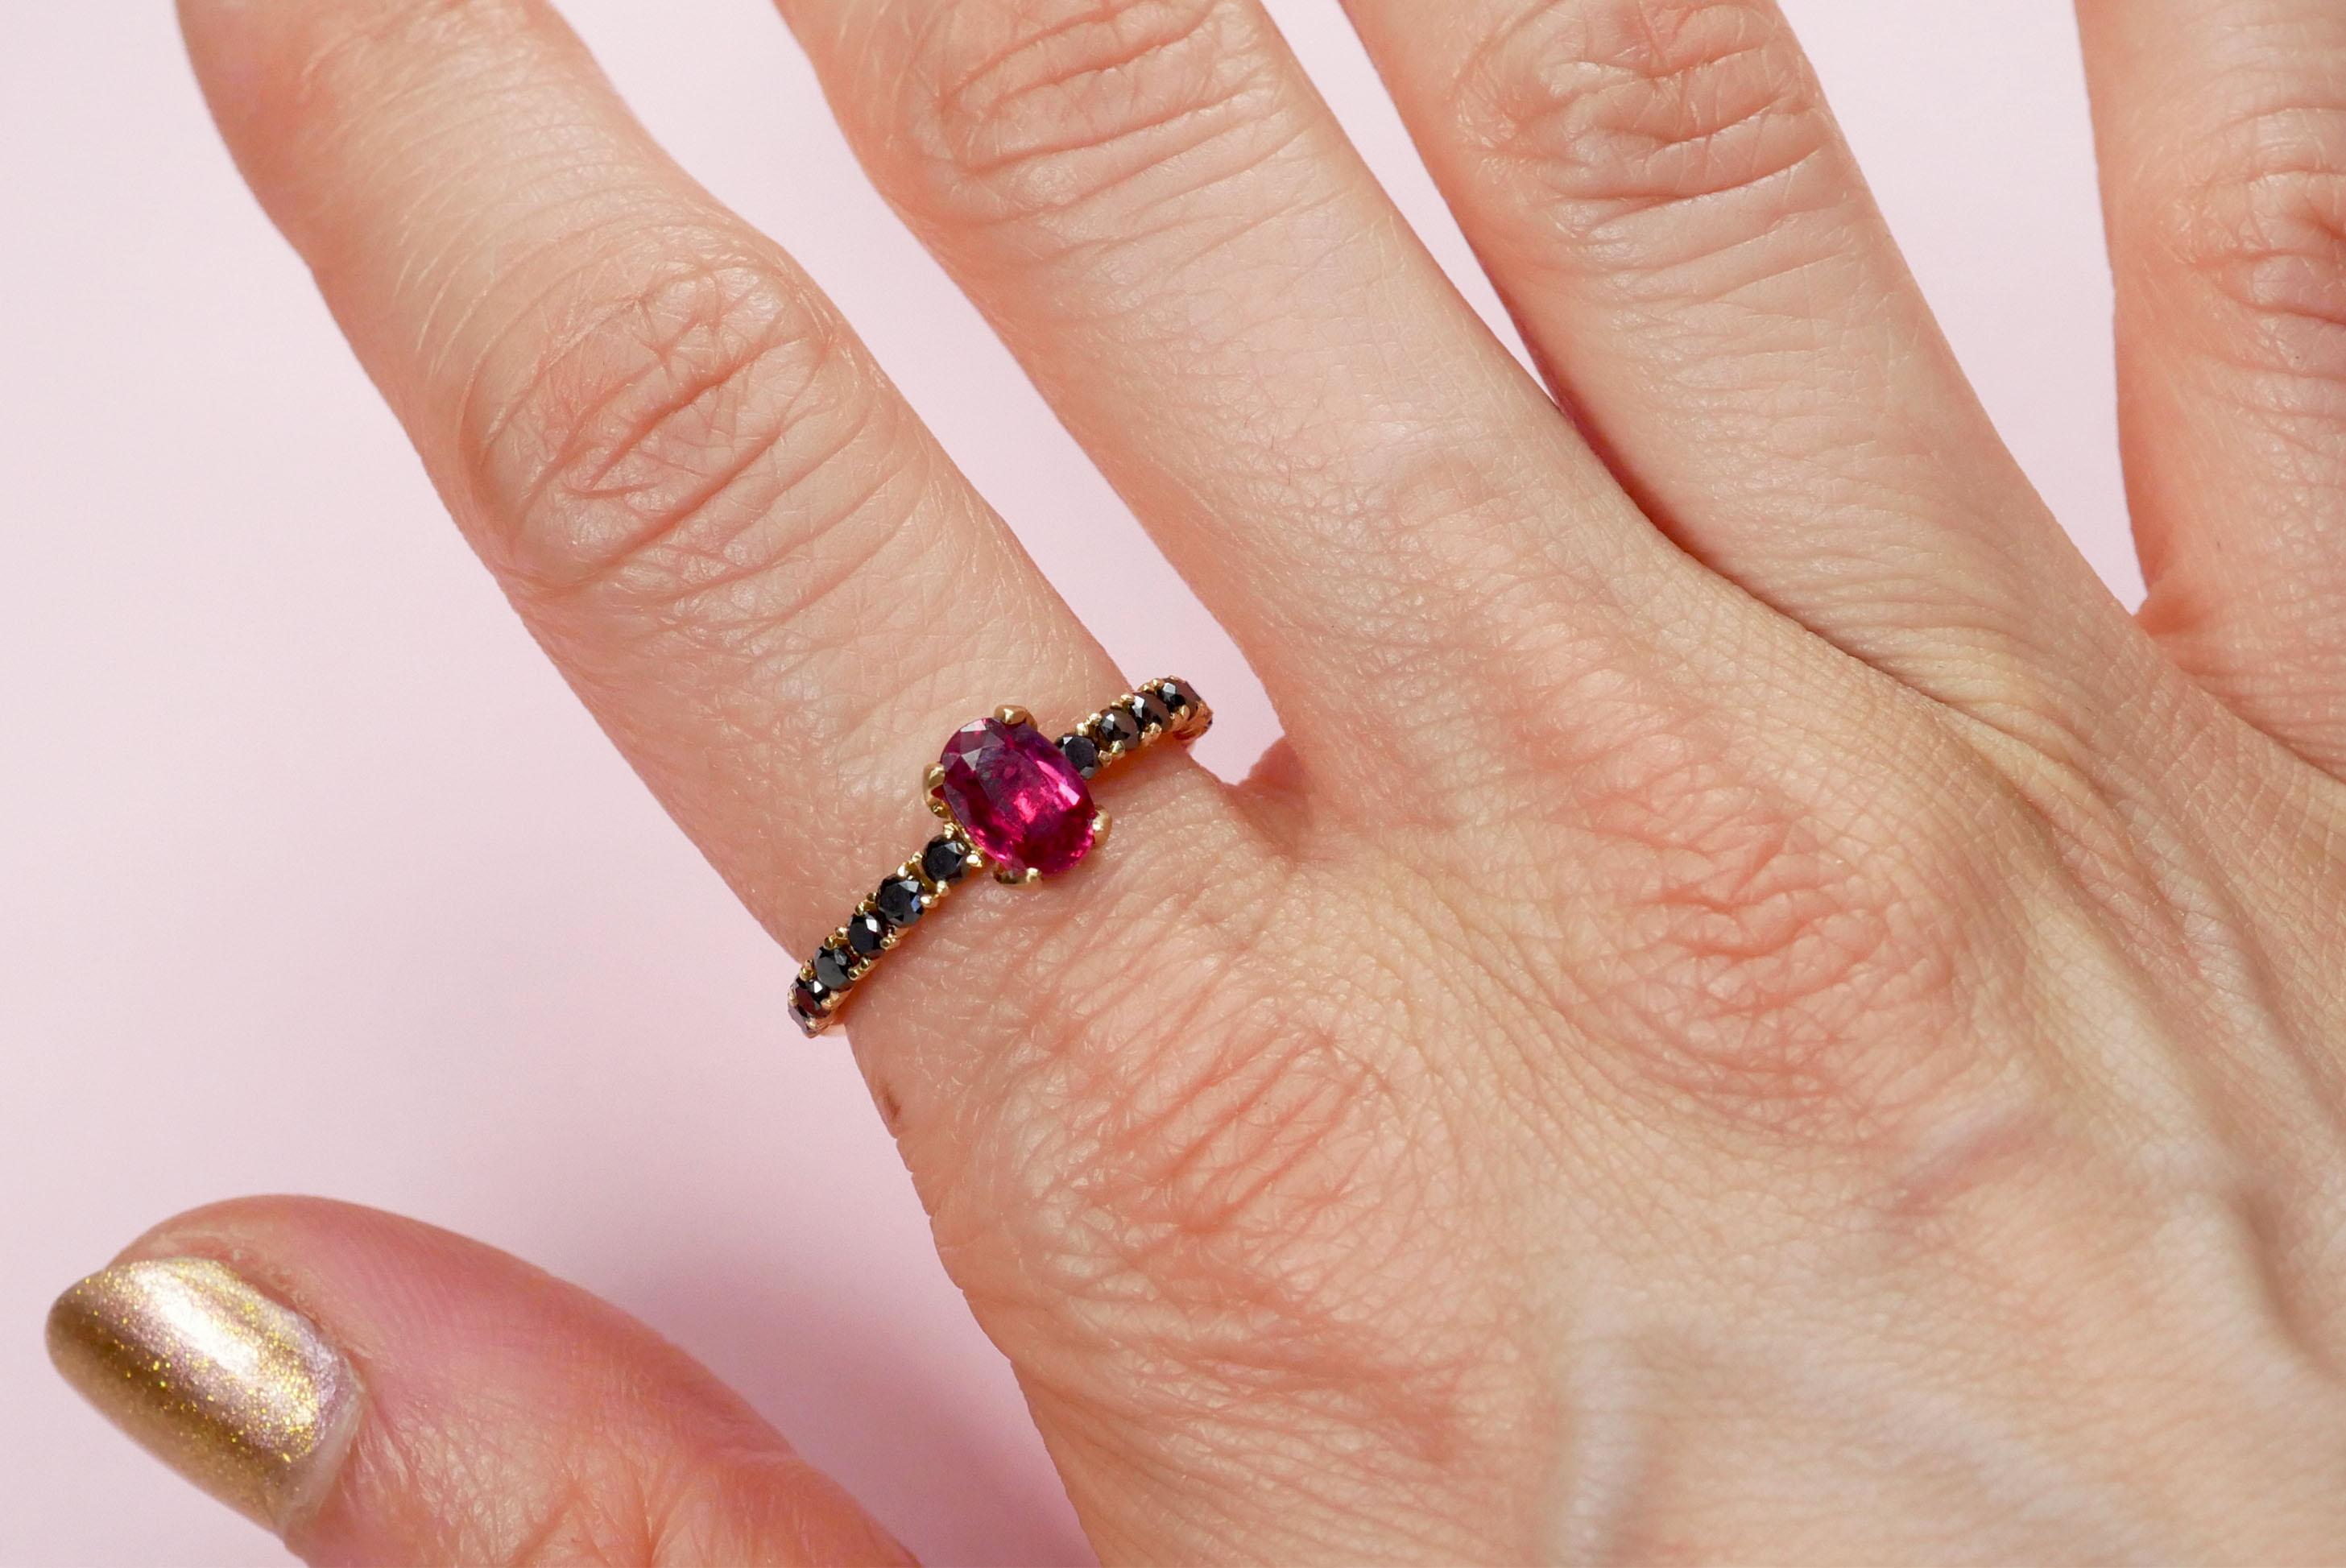 For Sale:  1 Carat Ruby and Black Diamonds Solitaire Ring Set in 18 Karat Yellow Gold 2